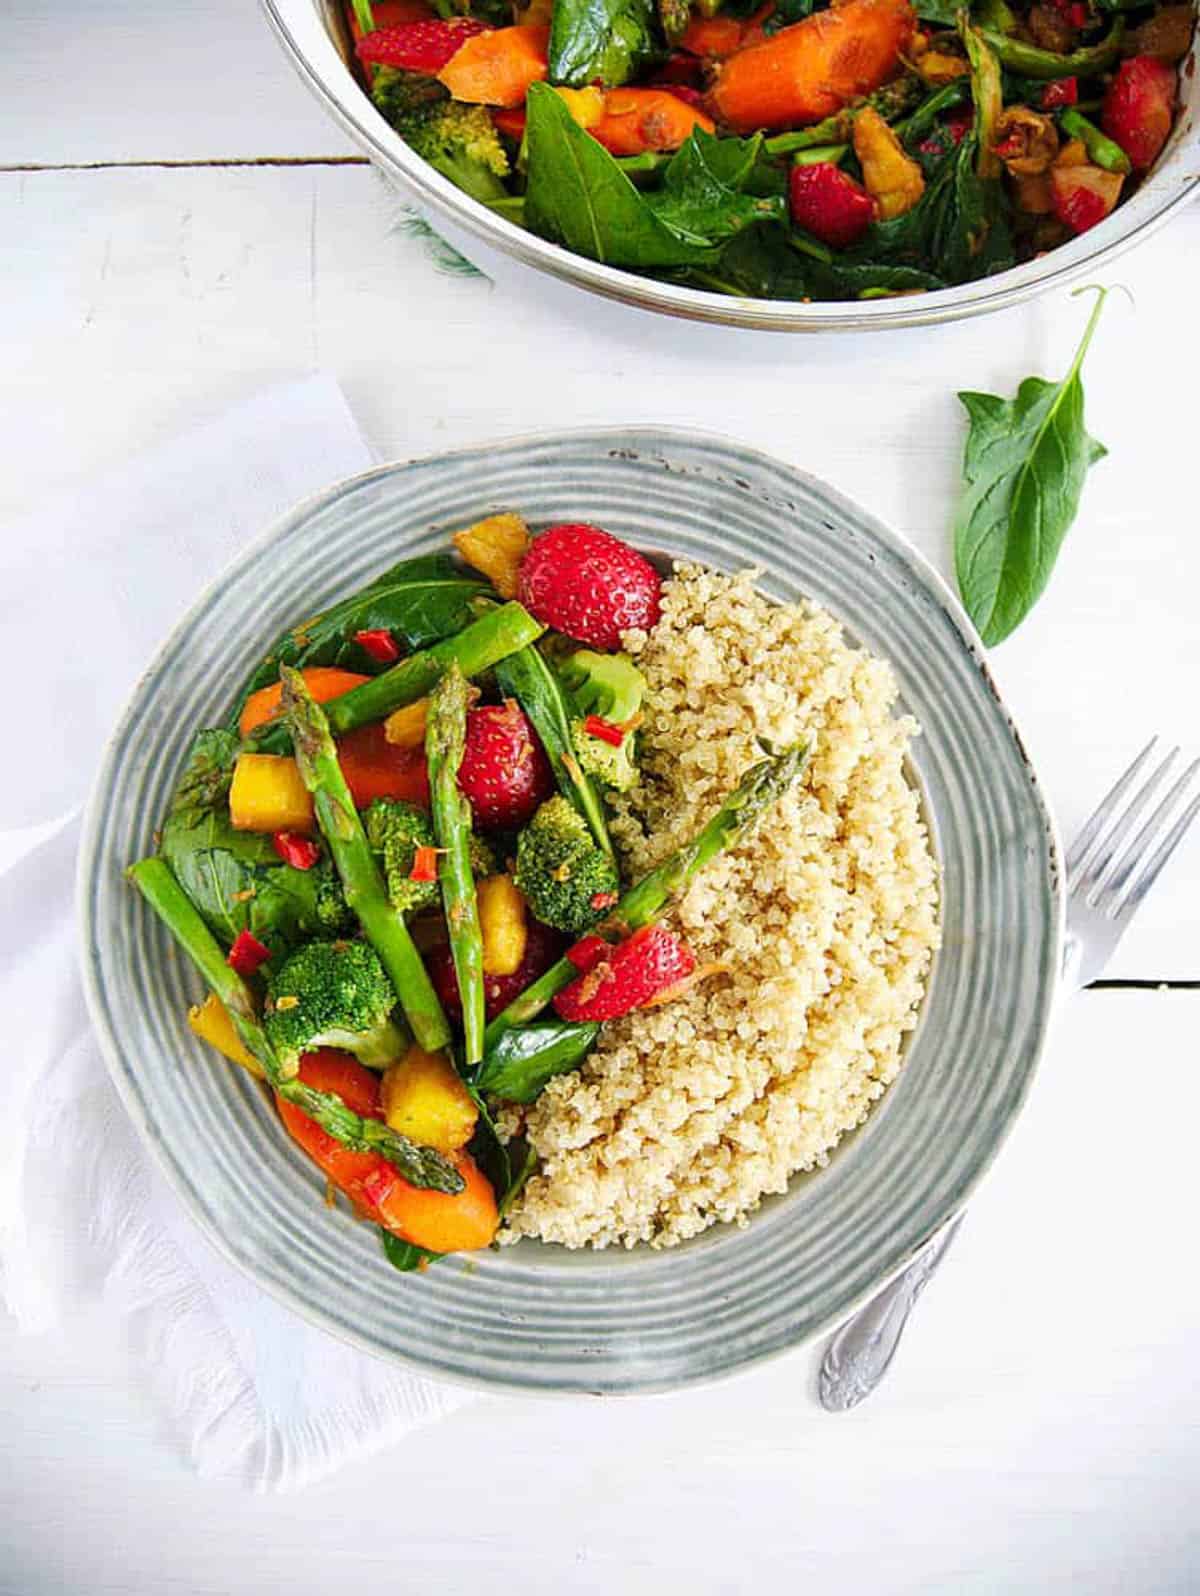 Vegetable stir fry served with brown rice on a grey plate.